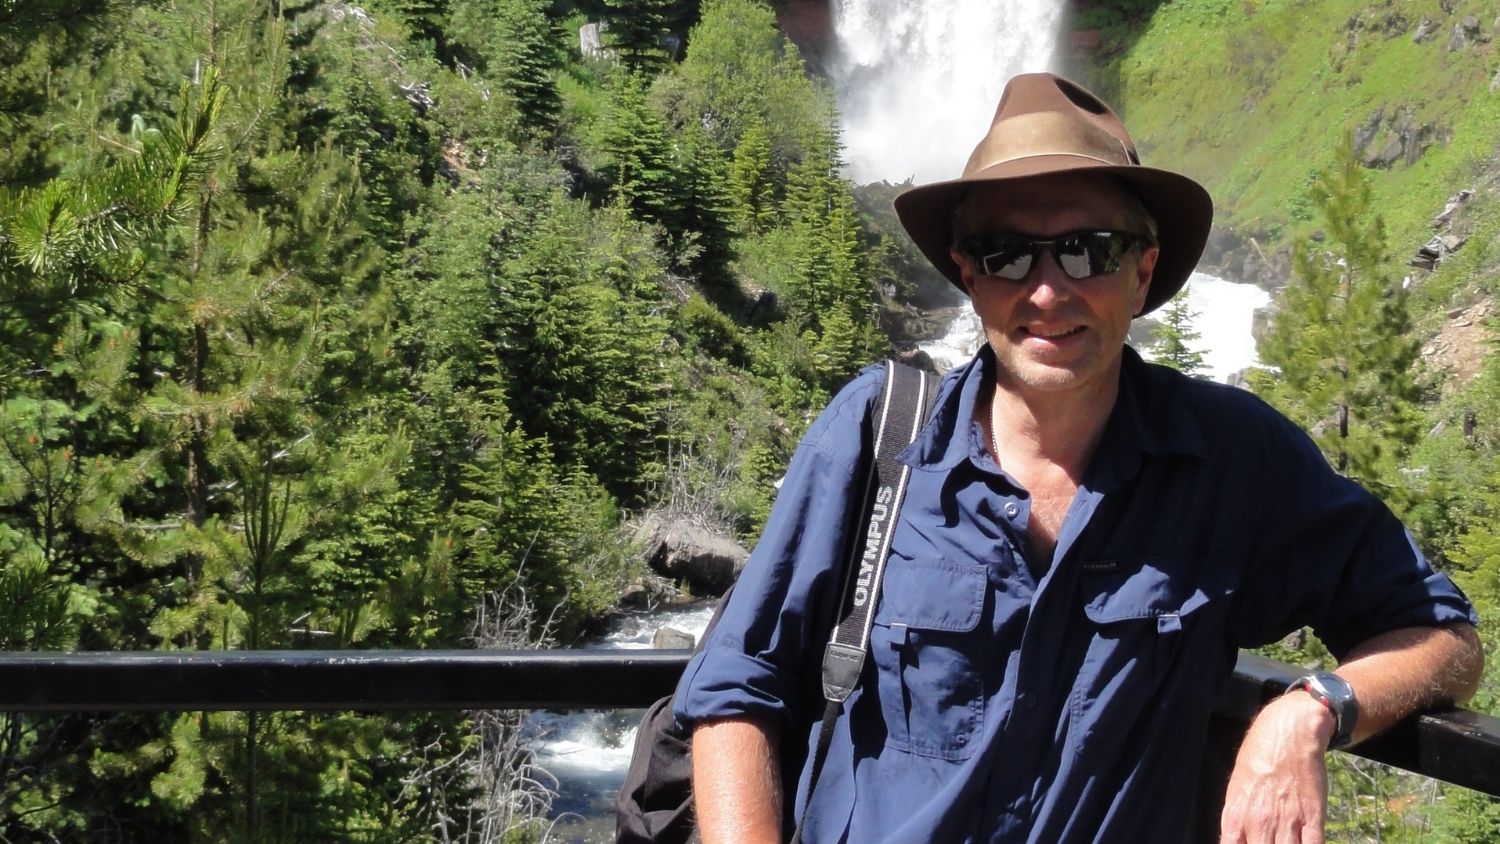 Professor George Hess is Helping Conserve Green Space in Urban Areas, College of Natural Resources, George Hess at Tumalo Falls, feature